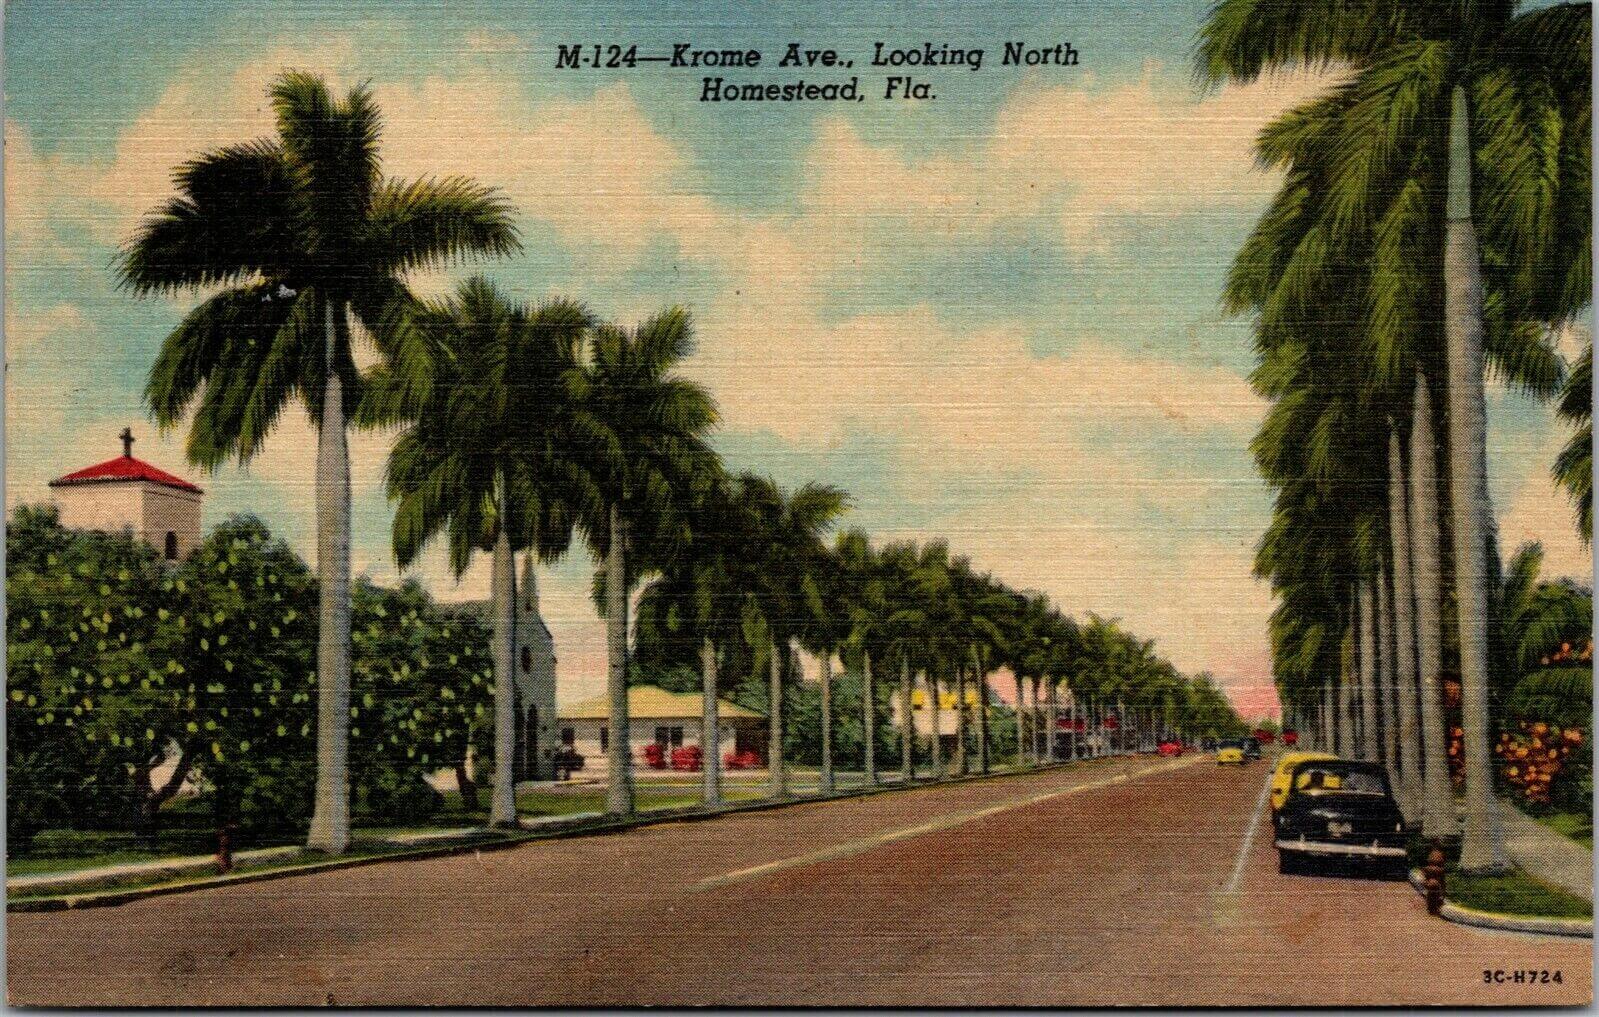 Old post card with the words M-124 - Krome Ave, Looking North Homestead, Fla. 